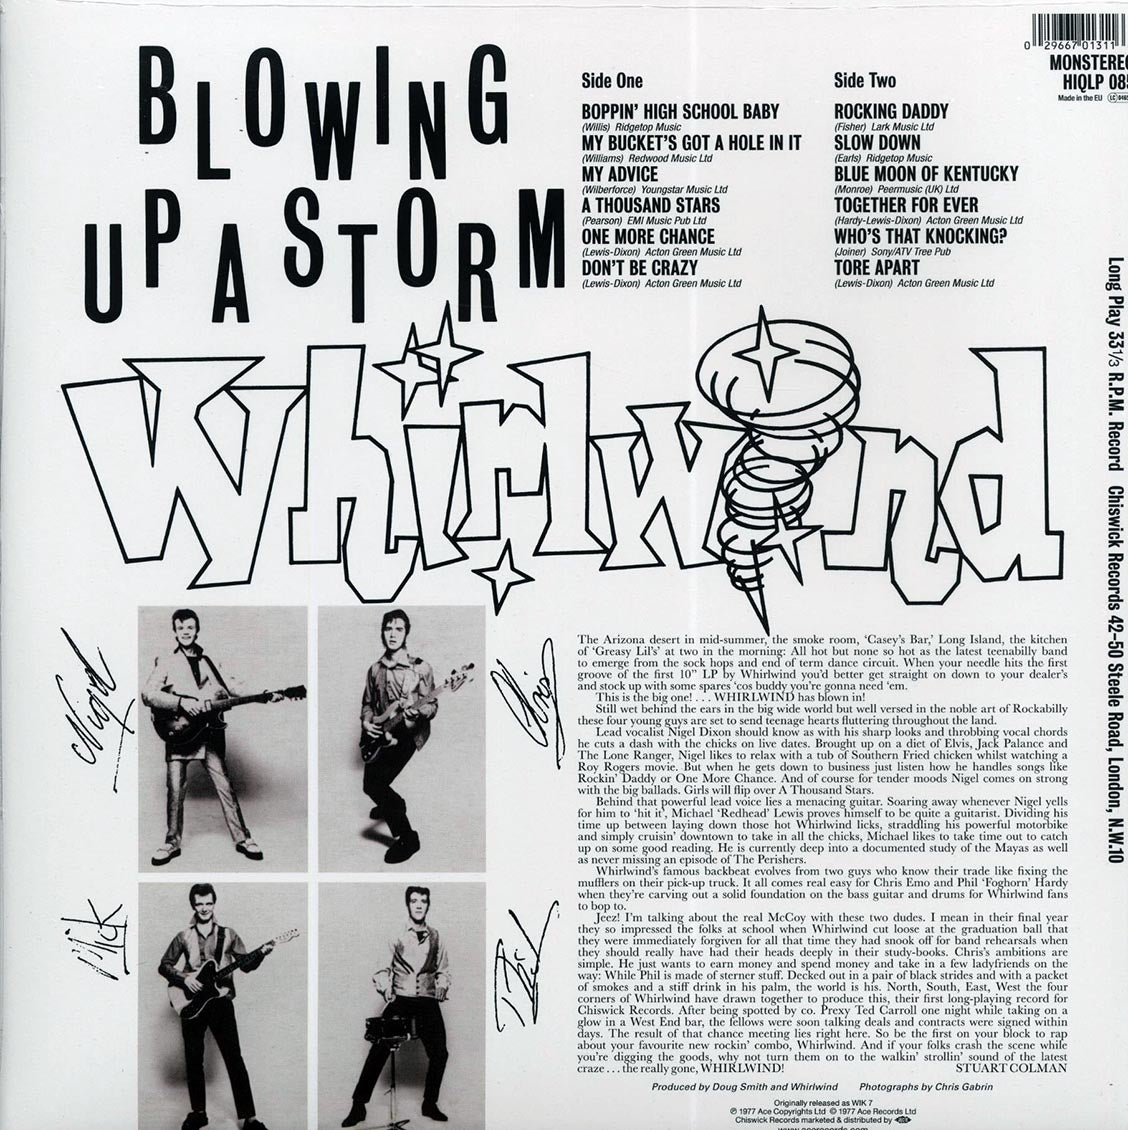 Whirlwind - Blowing Up A Storm